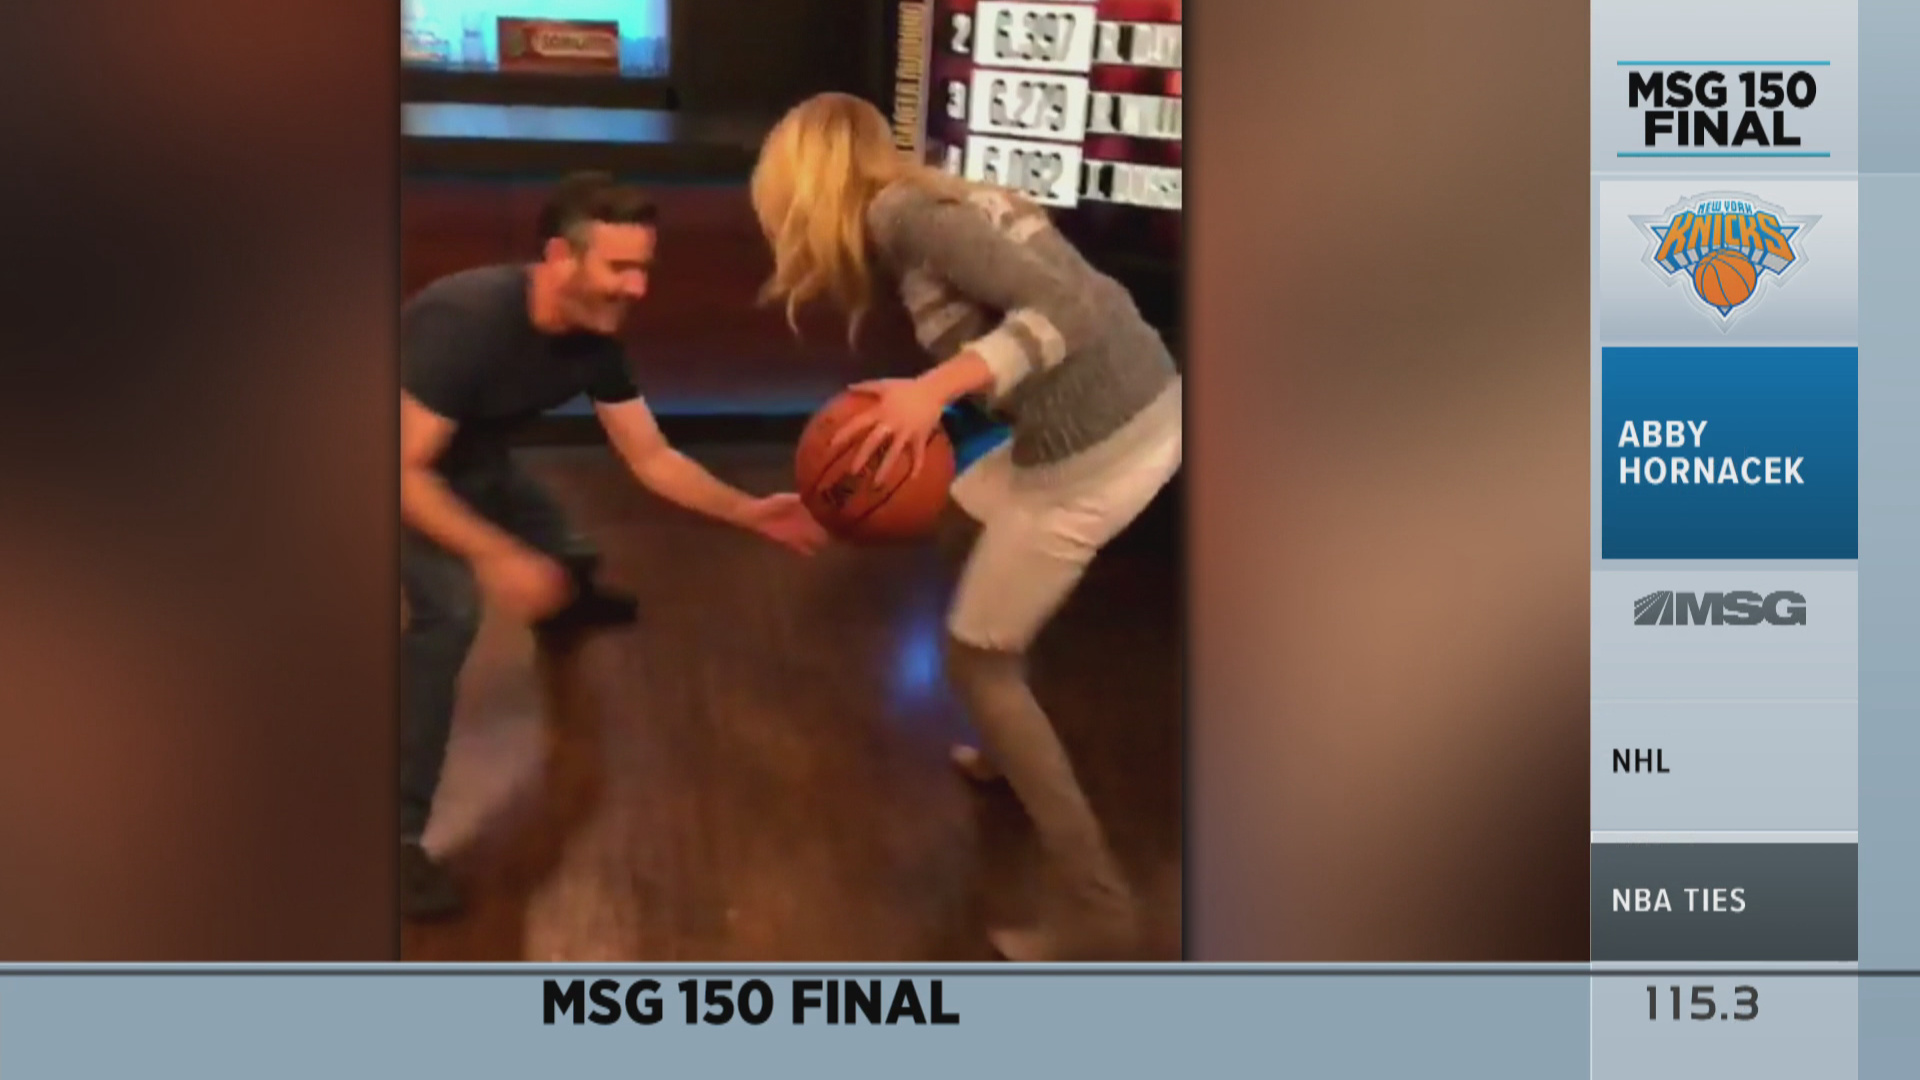 Abby Hornacek Has Moves Like Her Dad - MSGNetworks.com